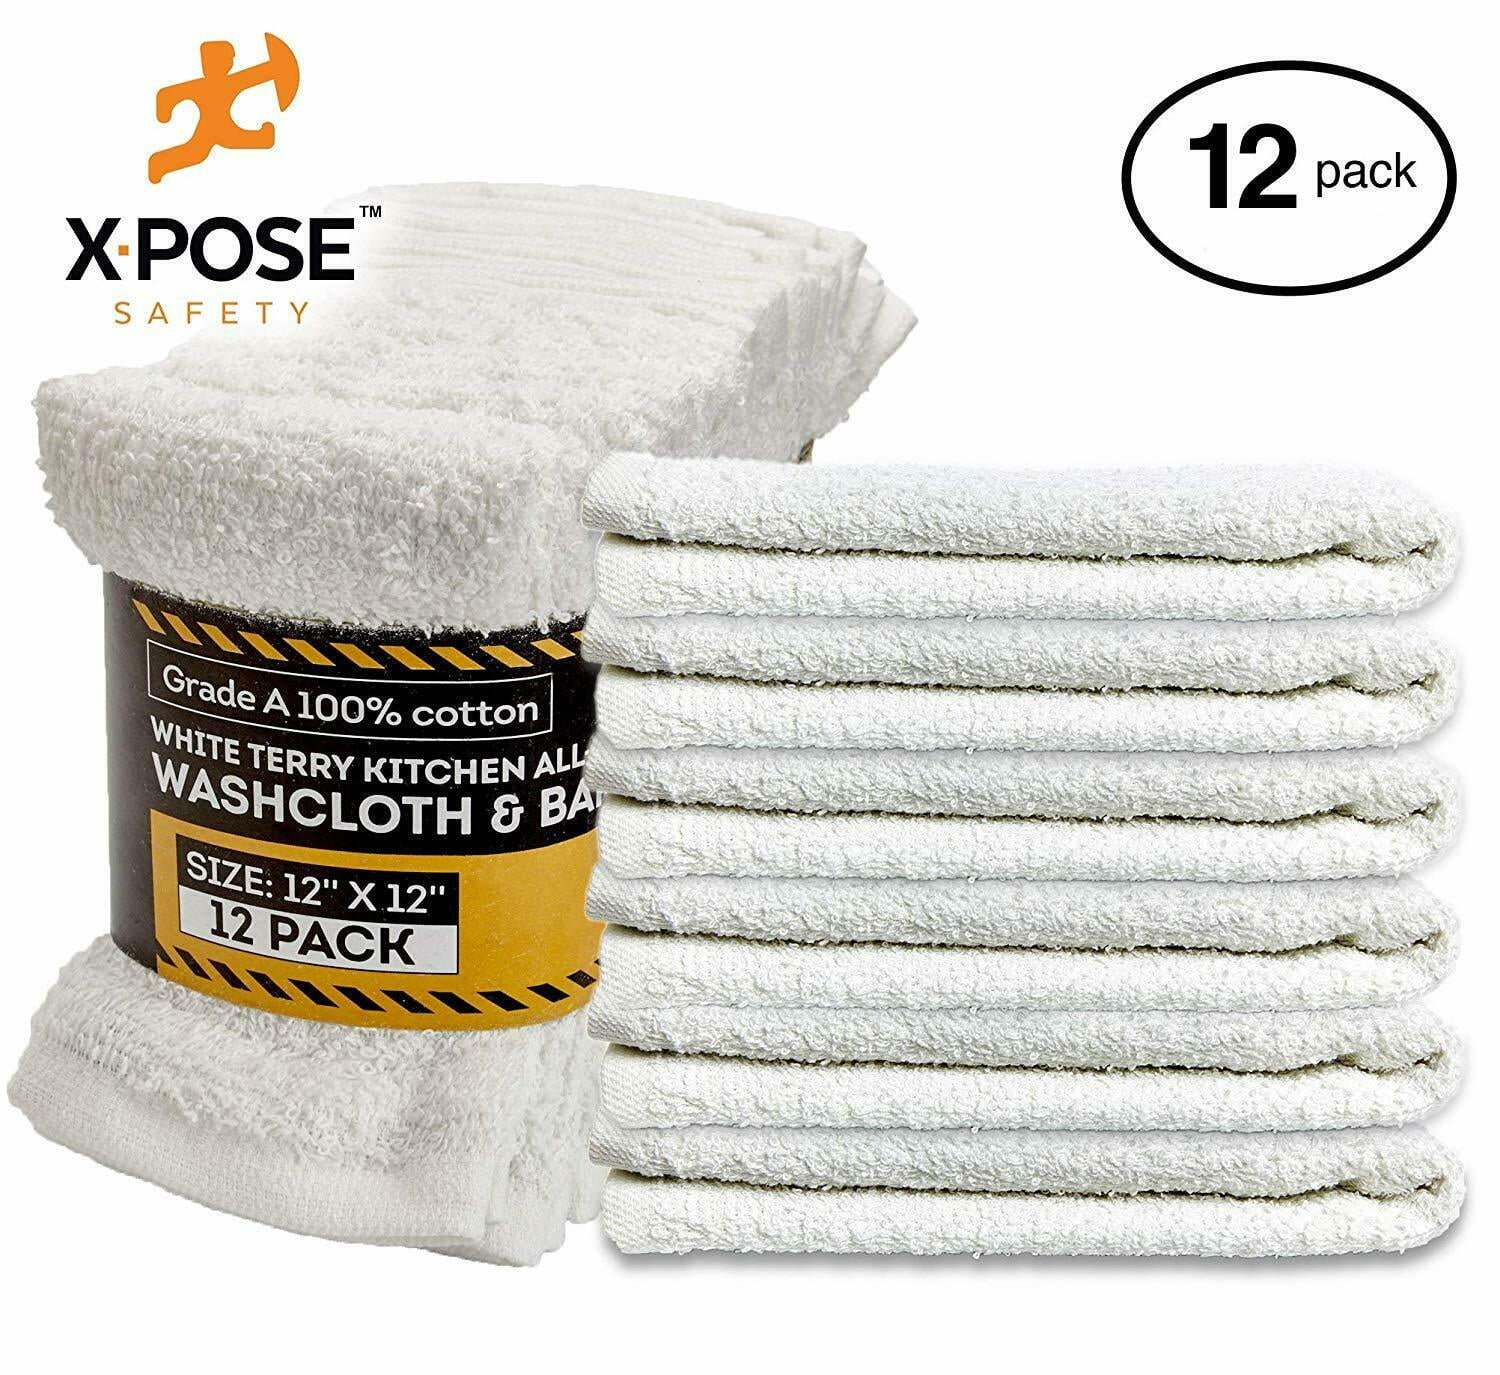 5 lb rags 16x19 box cotton terry cloth cleaning towels wiping cloths 